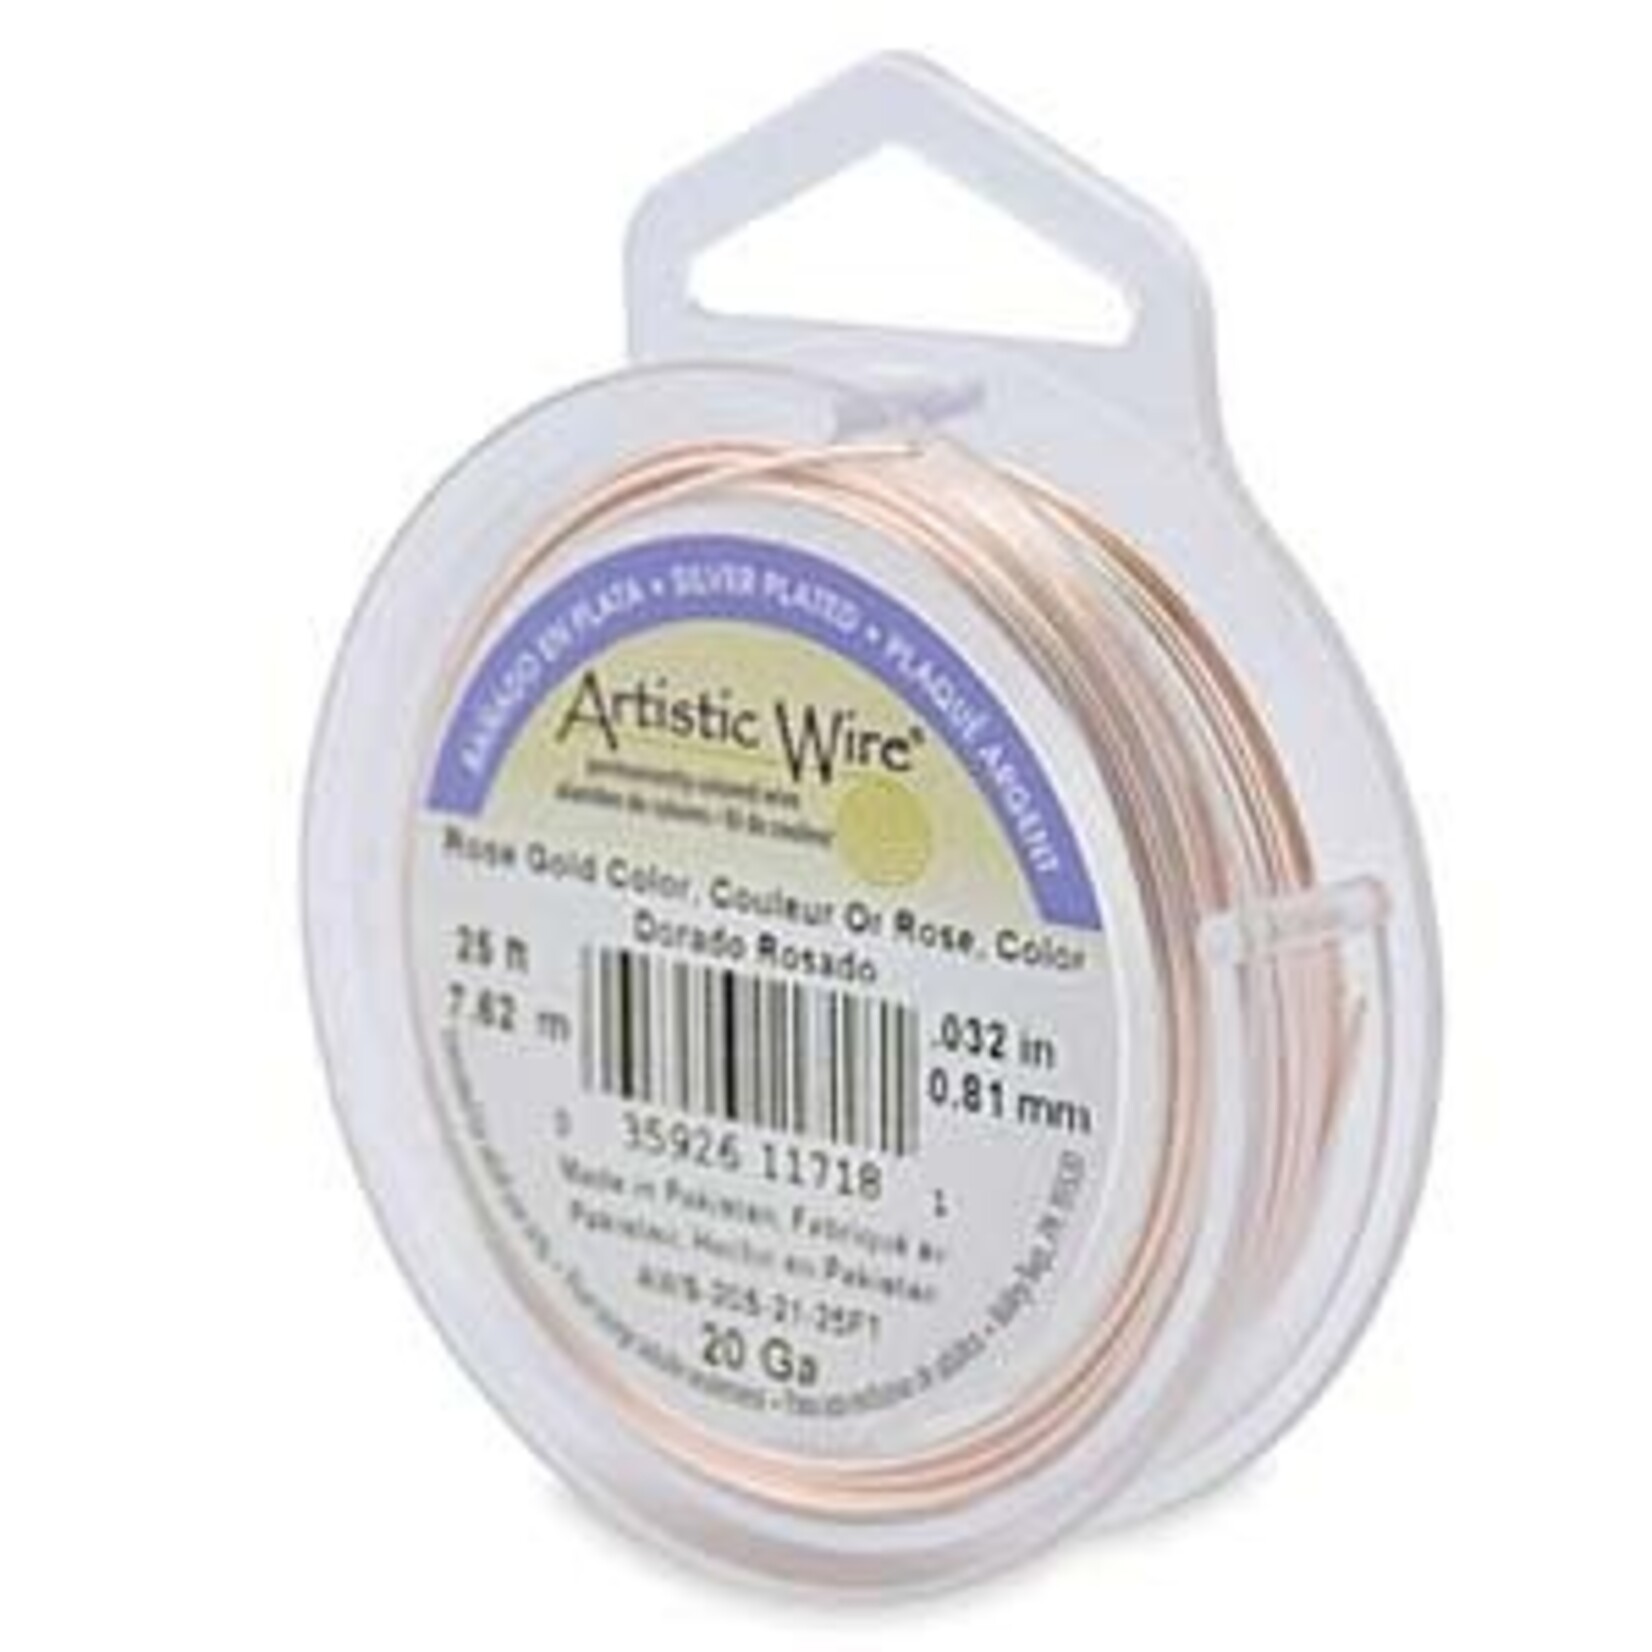 Artistic Wire Artistic Wire Rose Gold, 22 Gauge, 10 Yard Spool